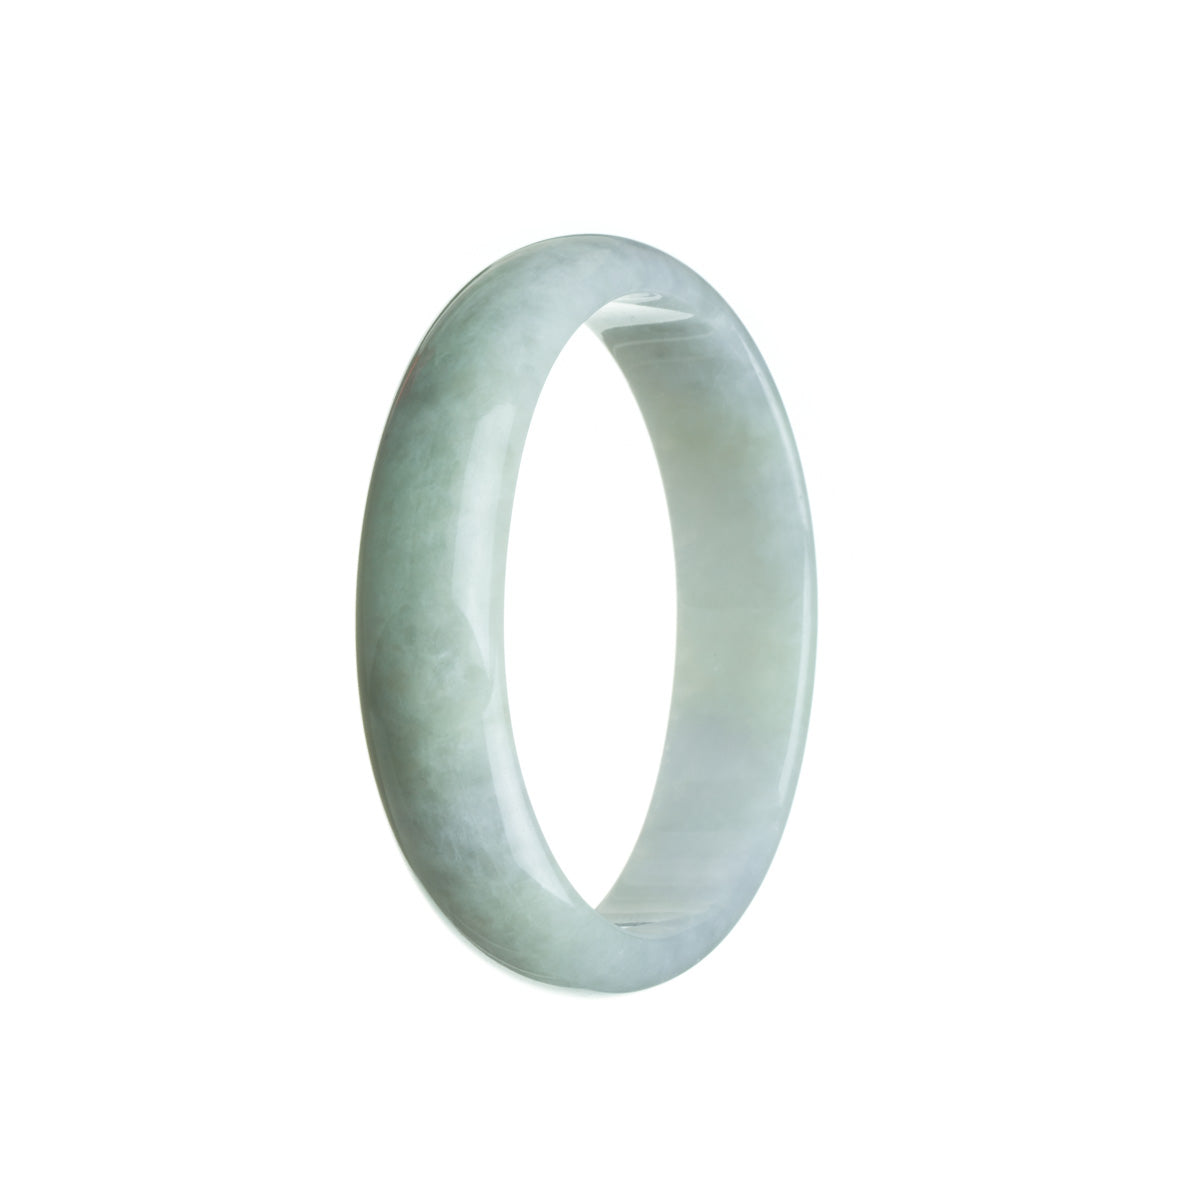 A close-up photo of a pale green traditional jade bracelet, with a slight lavender hue. The bracelet is oval-shaped and measures 57mm. Handcrafted with care by MAYS GEMS.